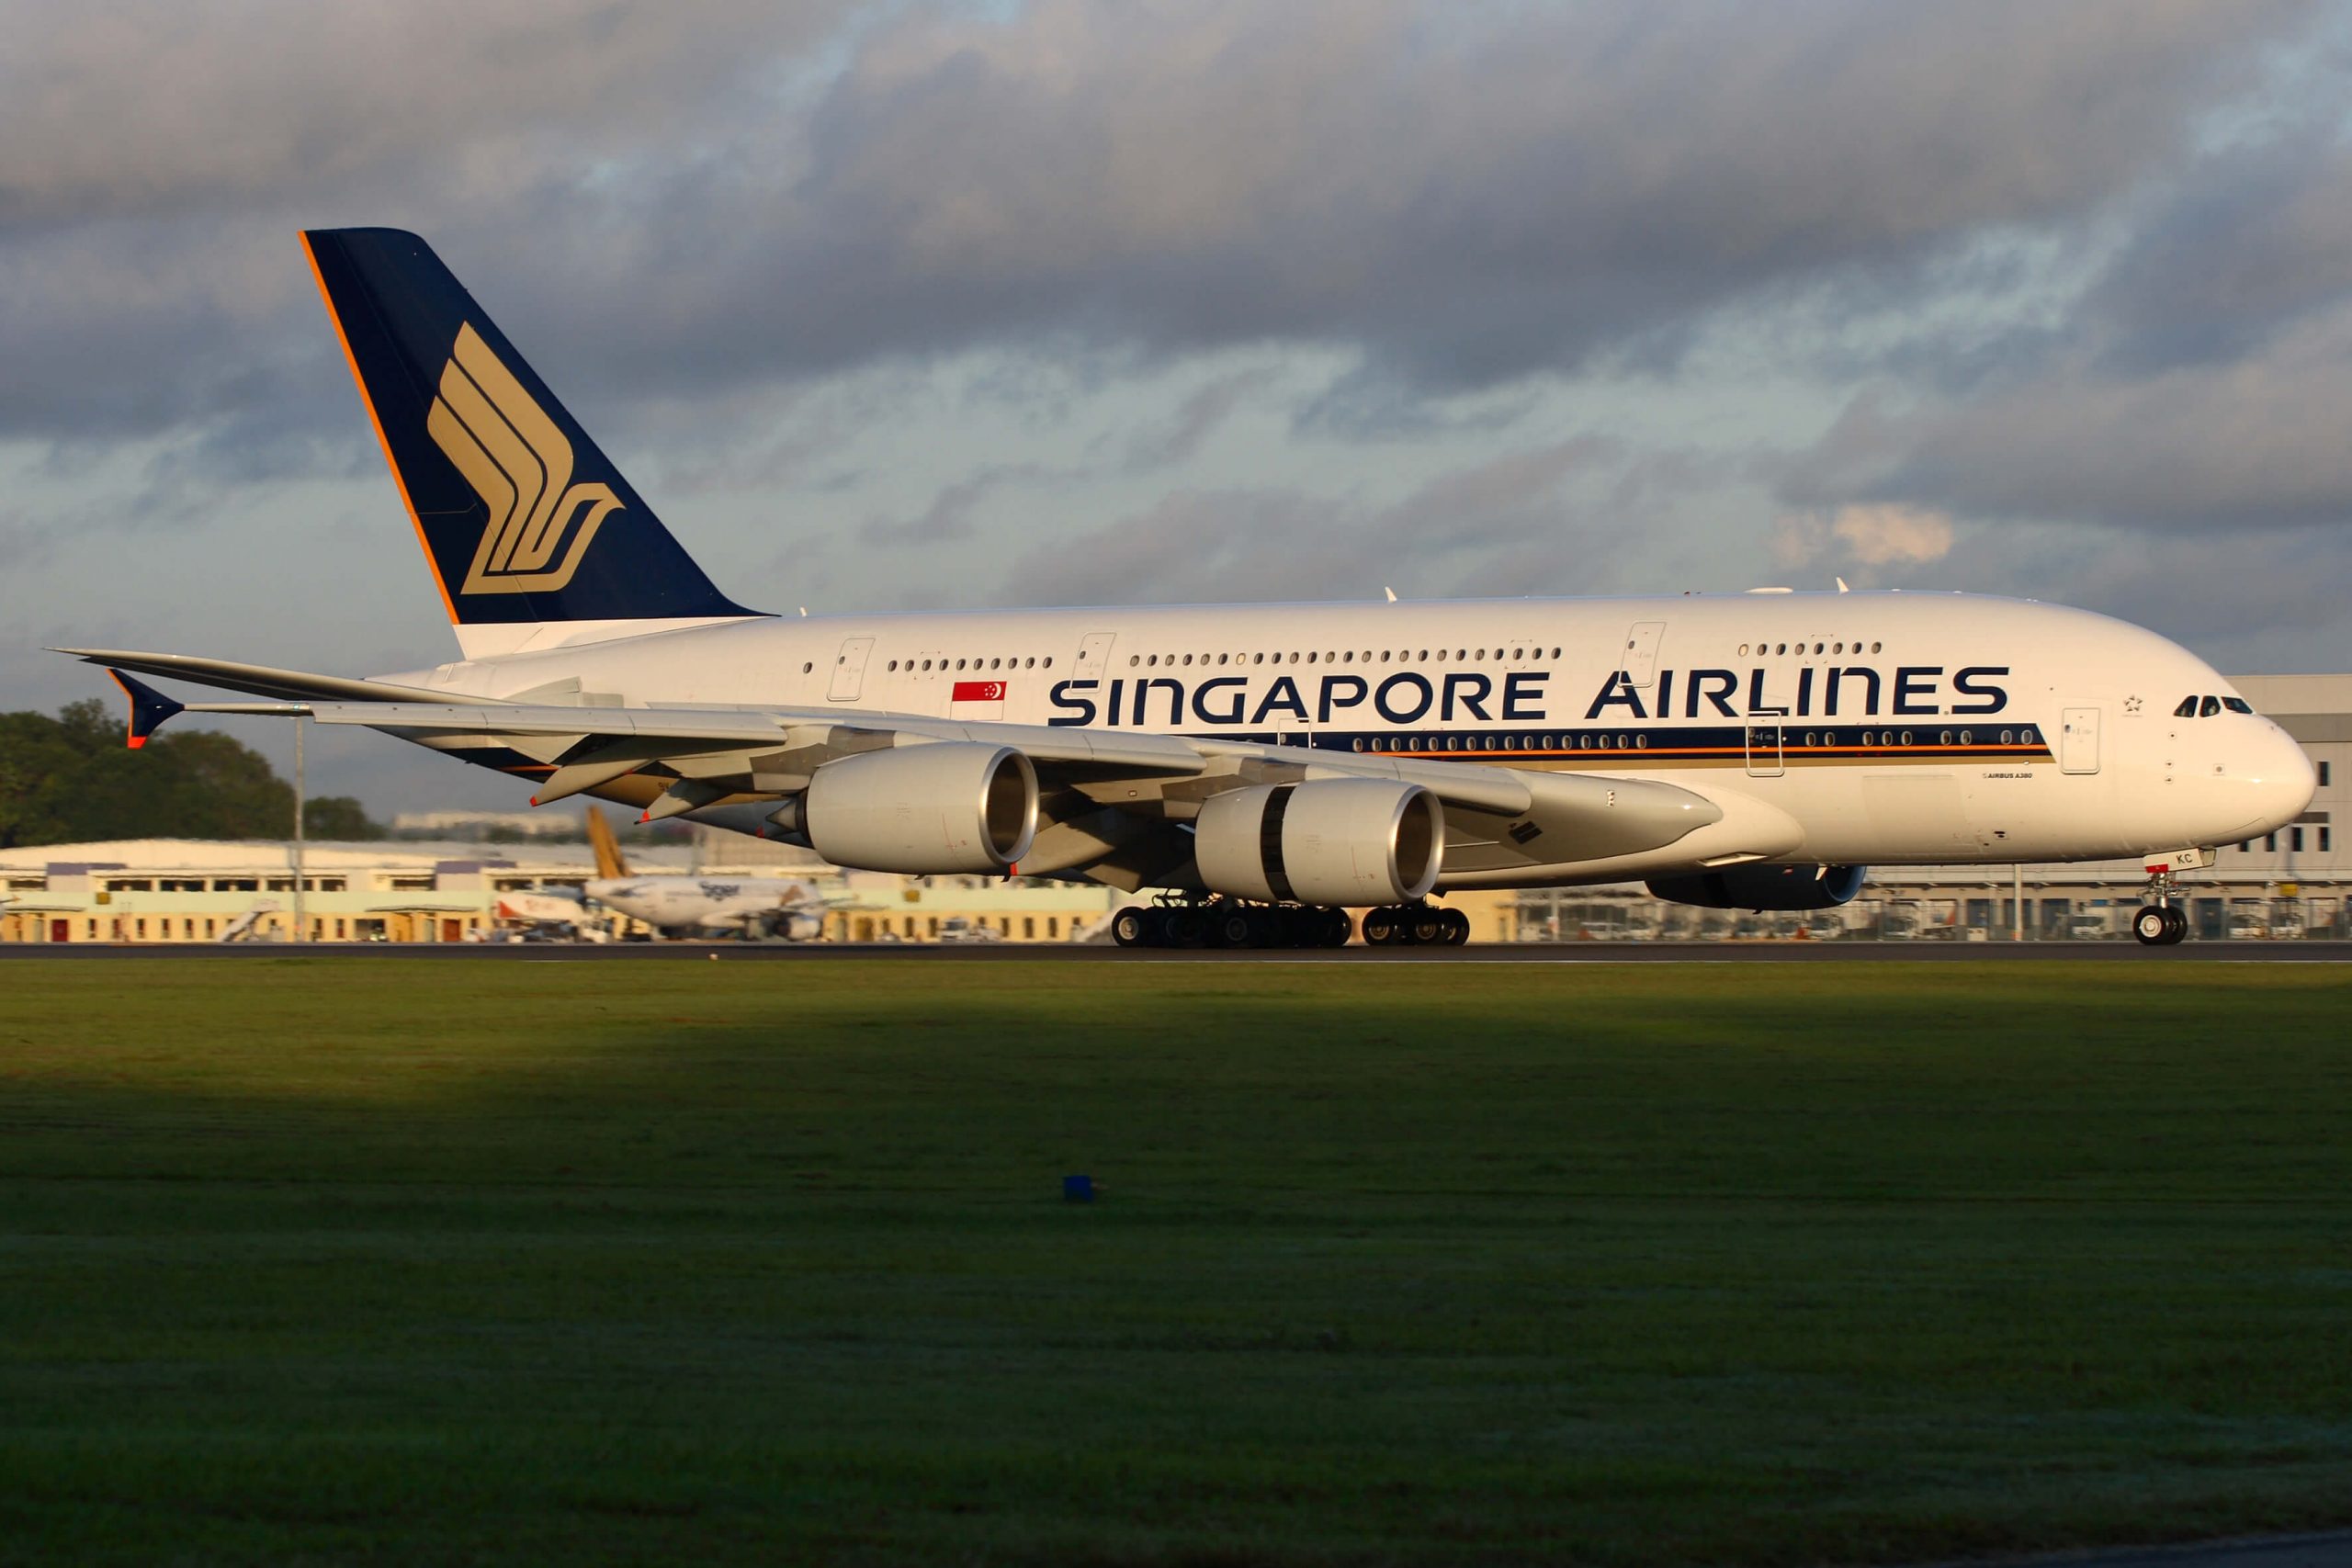 Singapore Airlines takes delivery of its 16th 787-10 Dreamliner